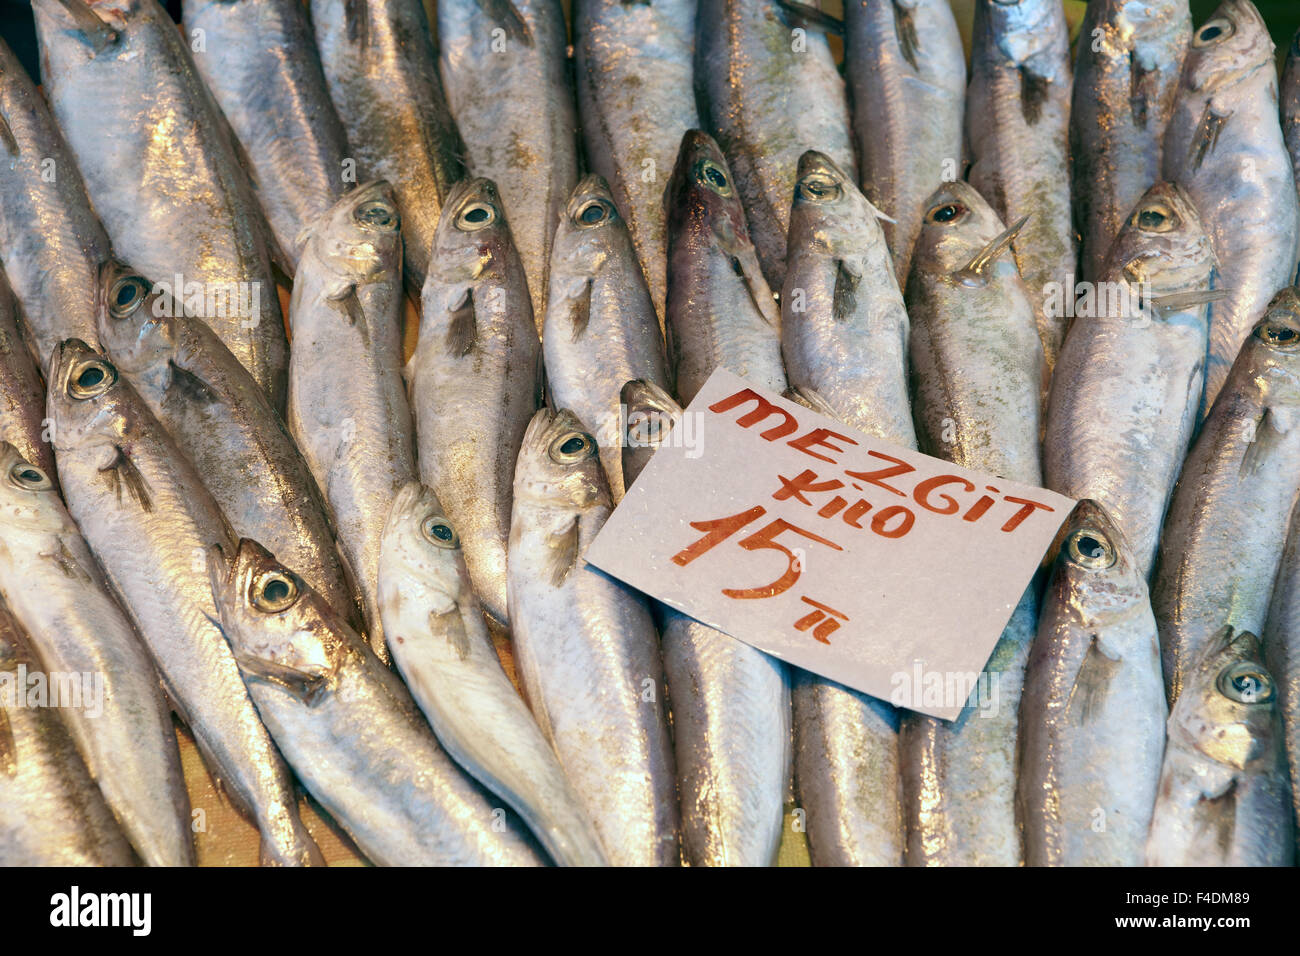 Eastern bazaar - fresh fish Image of large pile of fresh fish with price tag on it Stock Photo